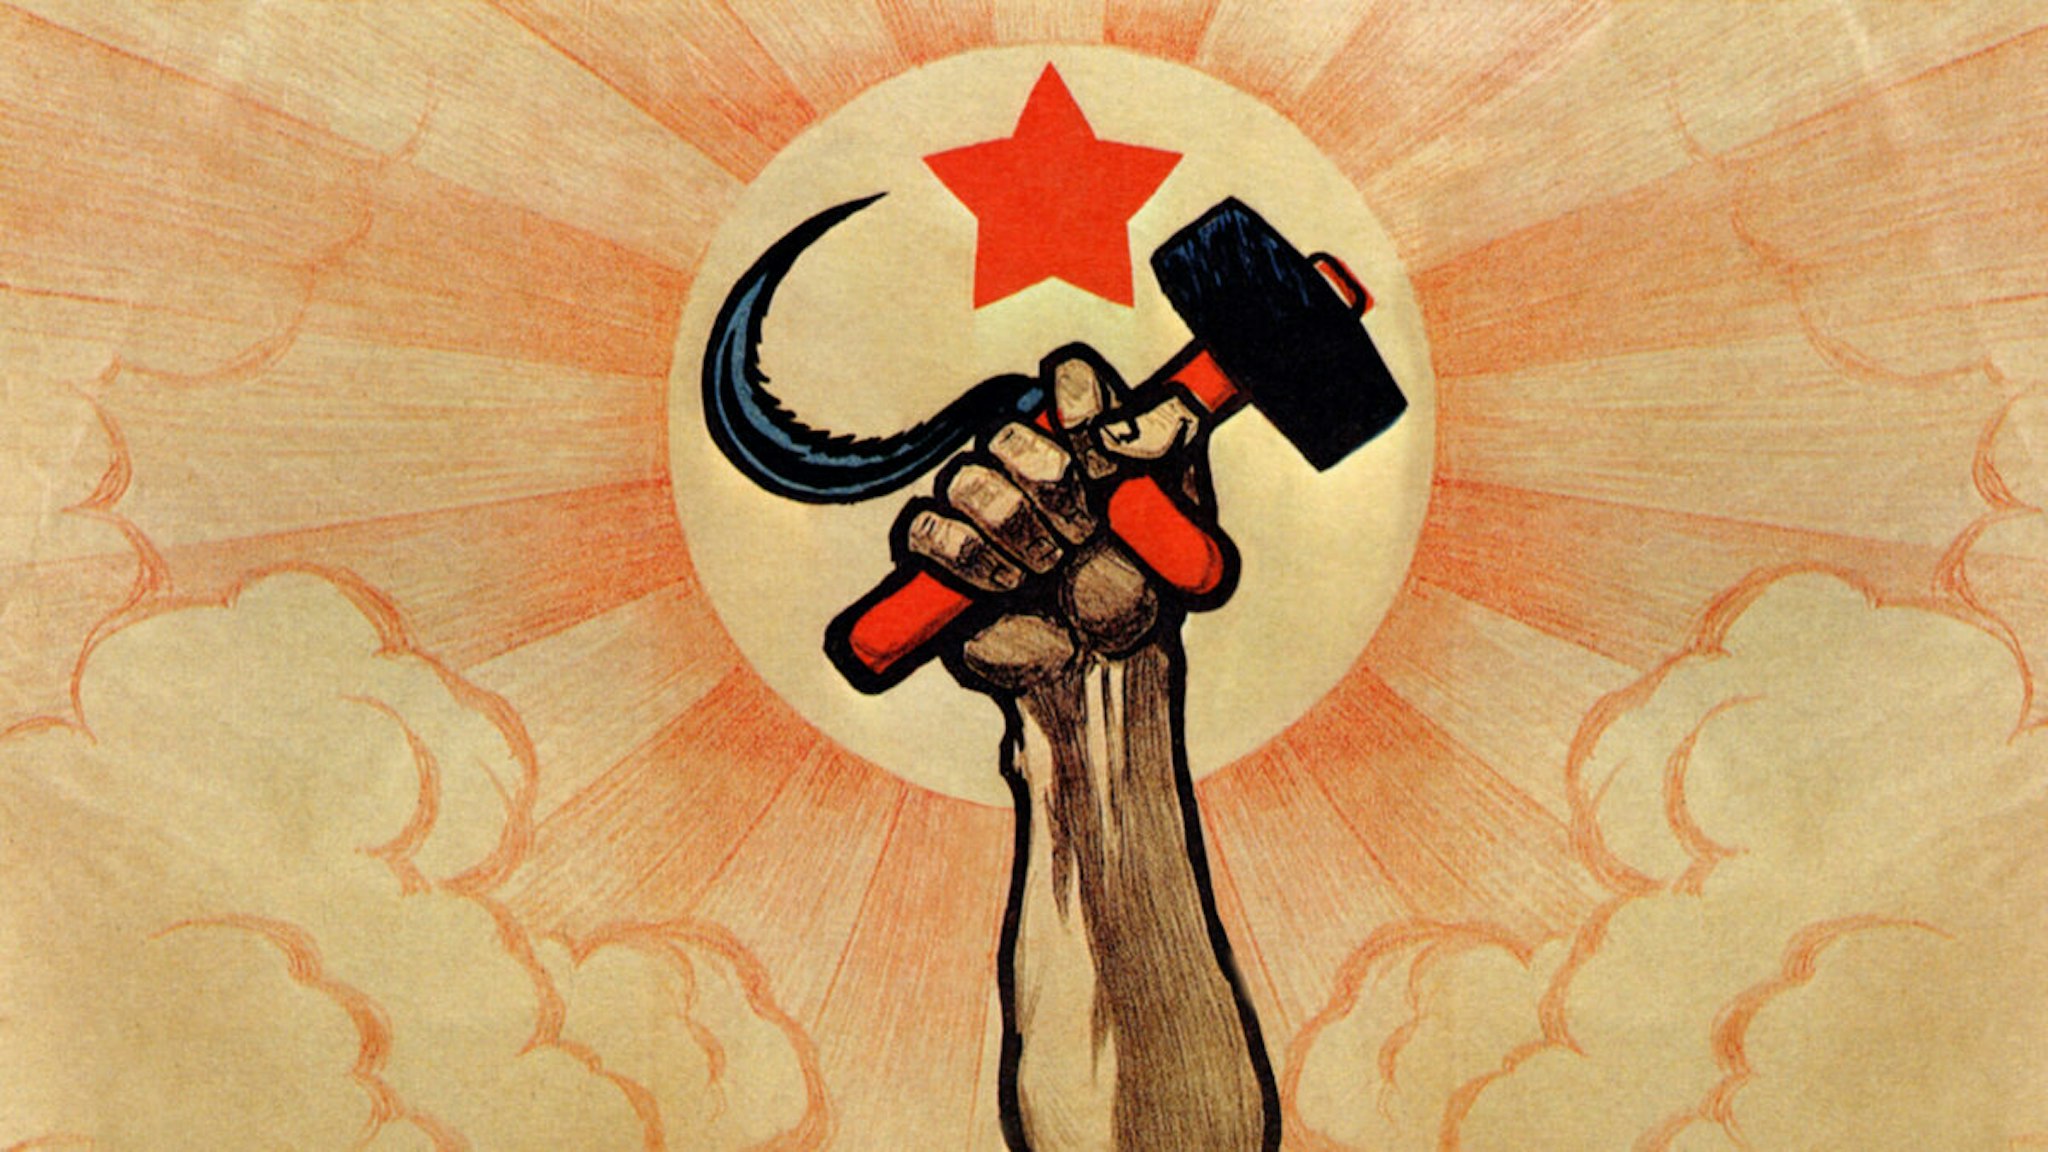 Symbols of communism: the hand wielding the hammer and sickle, in the background the rising sun and the red star ***Long live the fifth anniversary of the Great Proletarian Revolution!